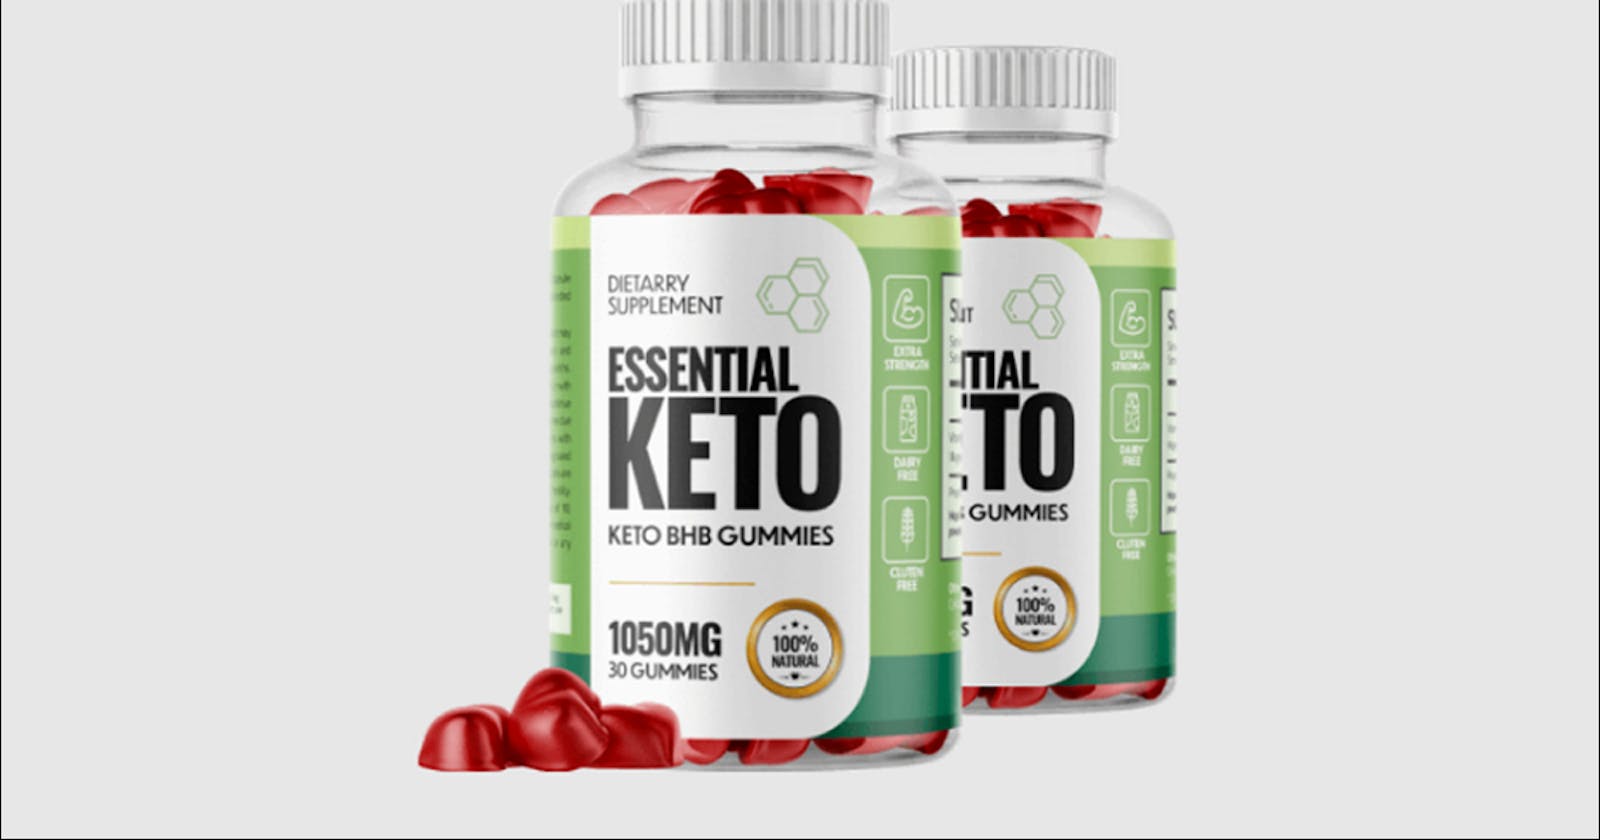 Keto bhb Gummies Australia Reviews Is it Safe? A Real Consumer Experience!